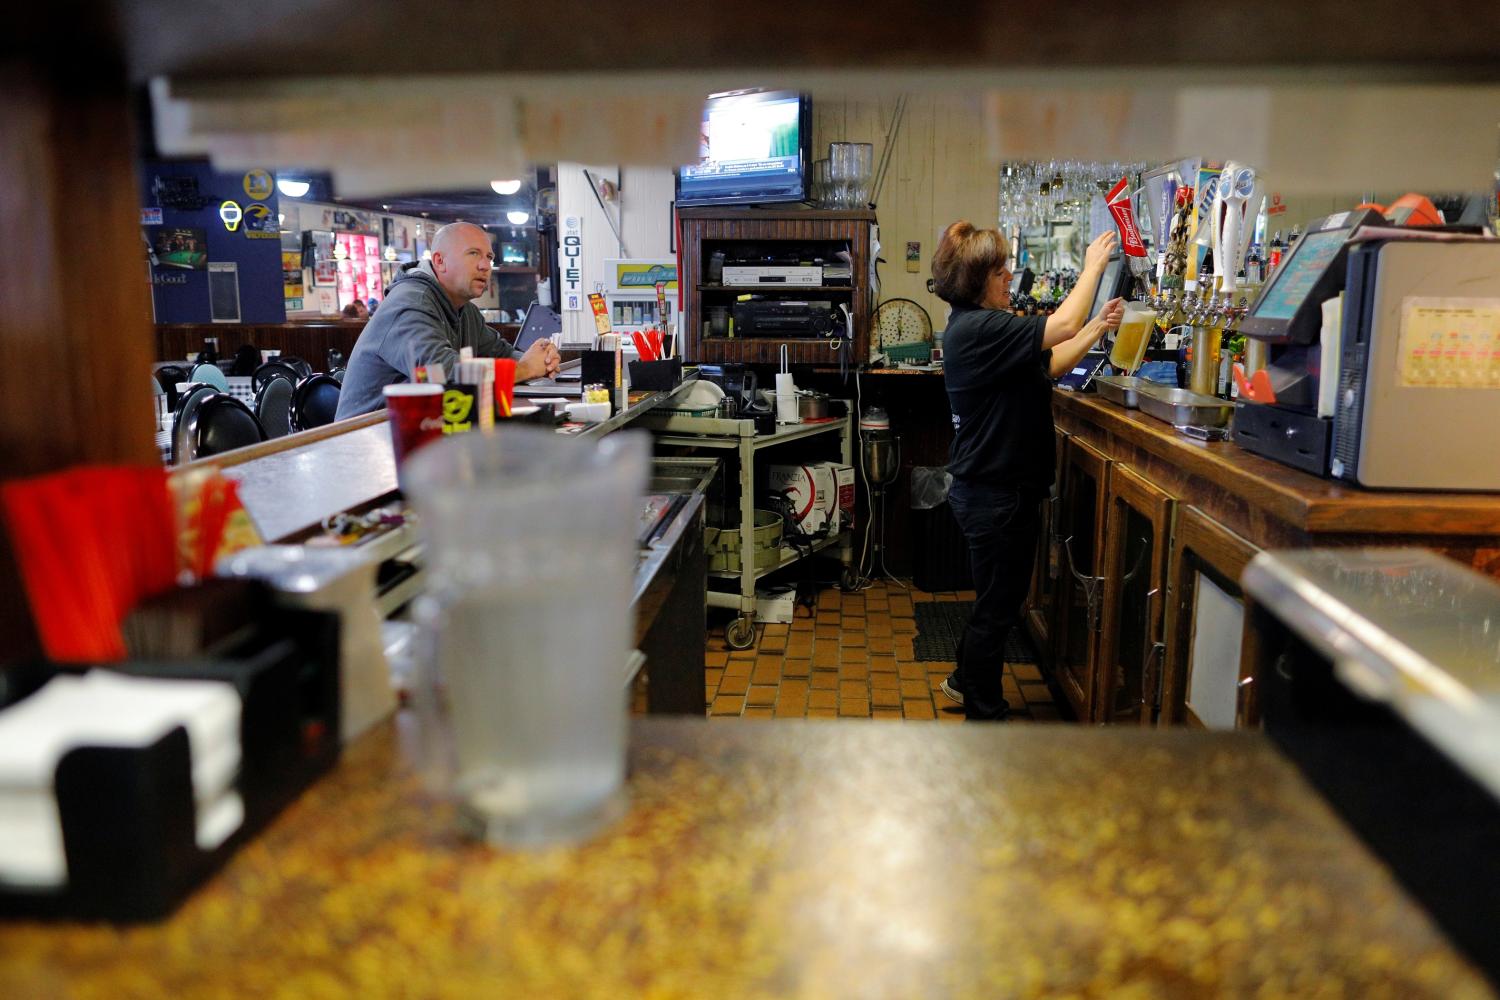 Jeanne Bonner, who made just $2 in tips one day last week as compared to $80 during a normal shift, works behind the bar at Latina Restaurant & Pizzeria near the General Motors Flint Truck Assembly where union auto workers are on strike in Flint, Michigan, U.S., October 9, 2019.     REUTERS/Brian Snyder